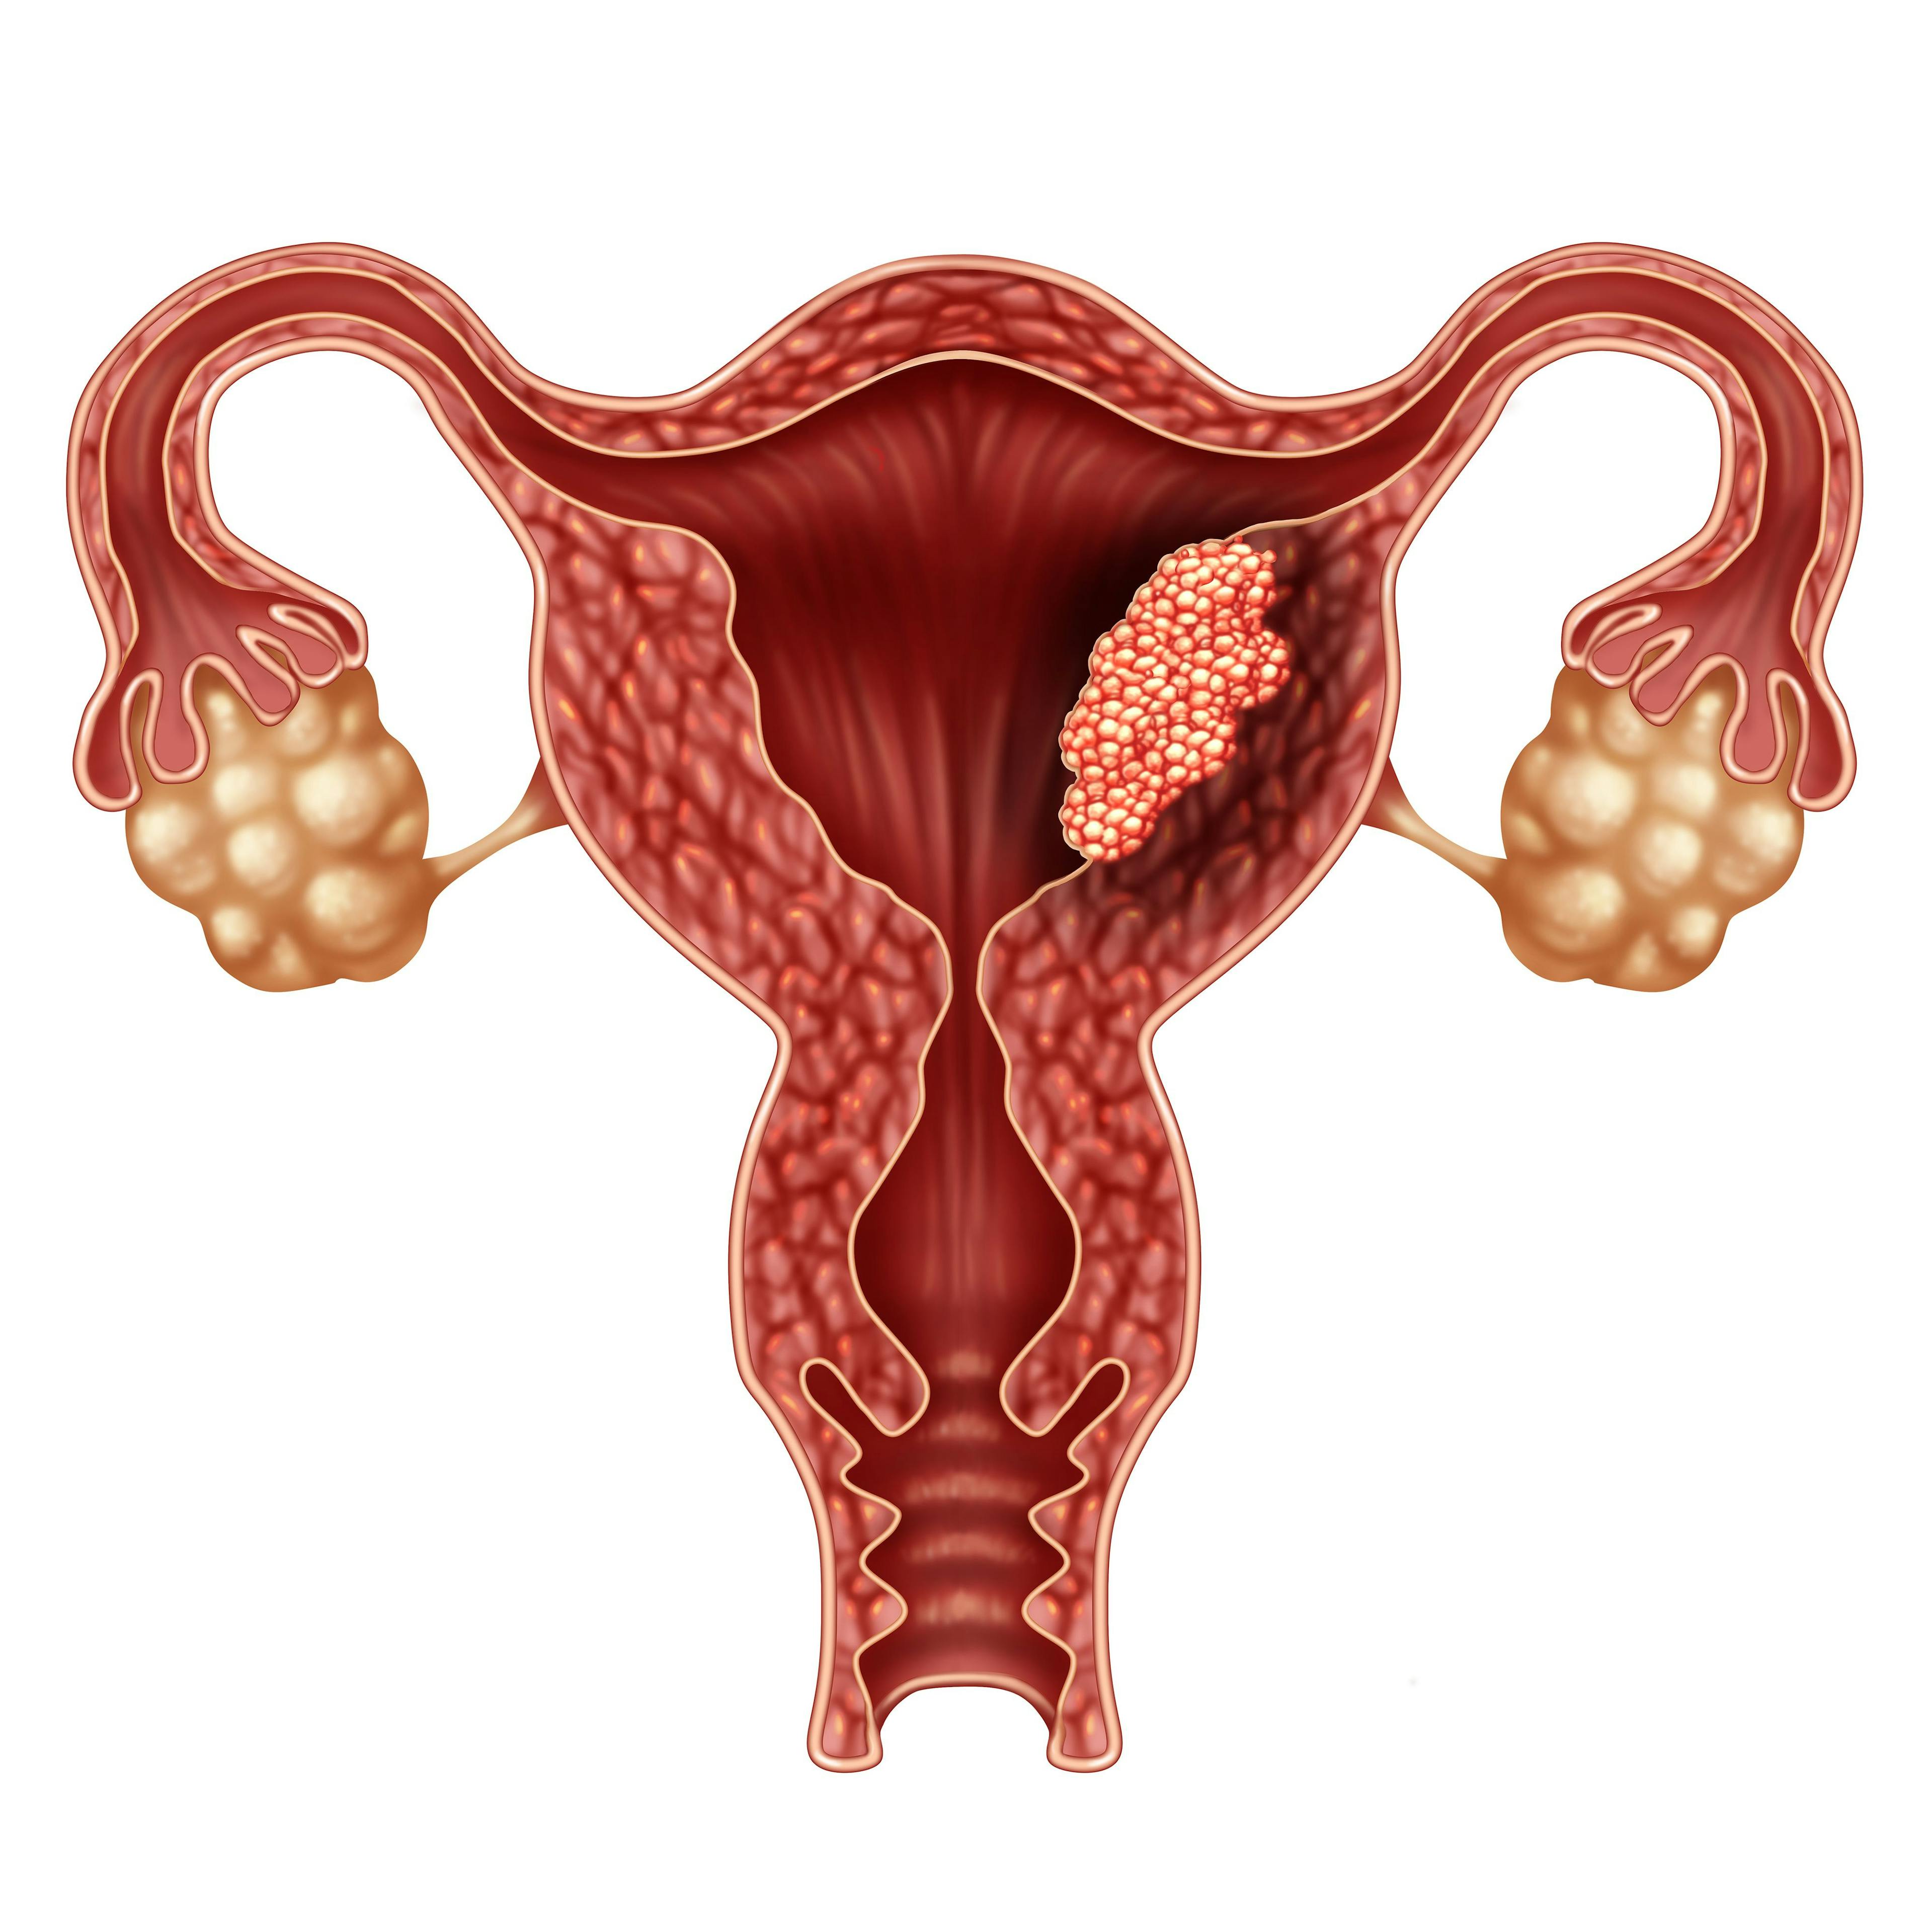  Immunotherapy approvals shine light on need for molecular testing in endometrial cancer